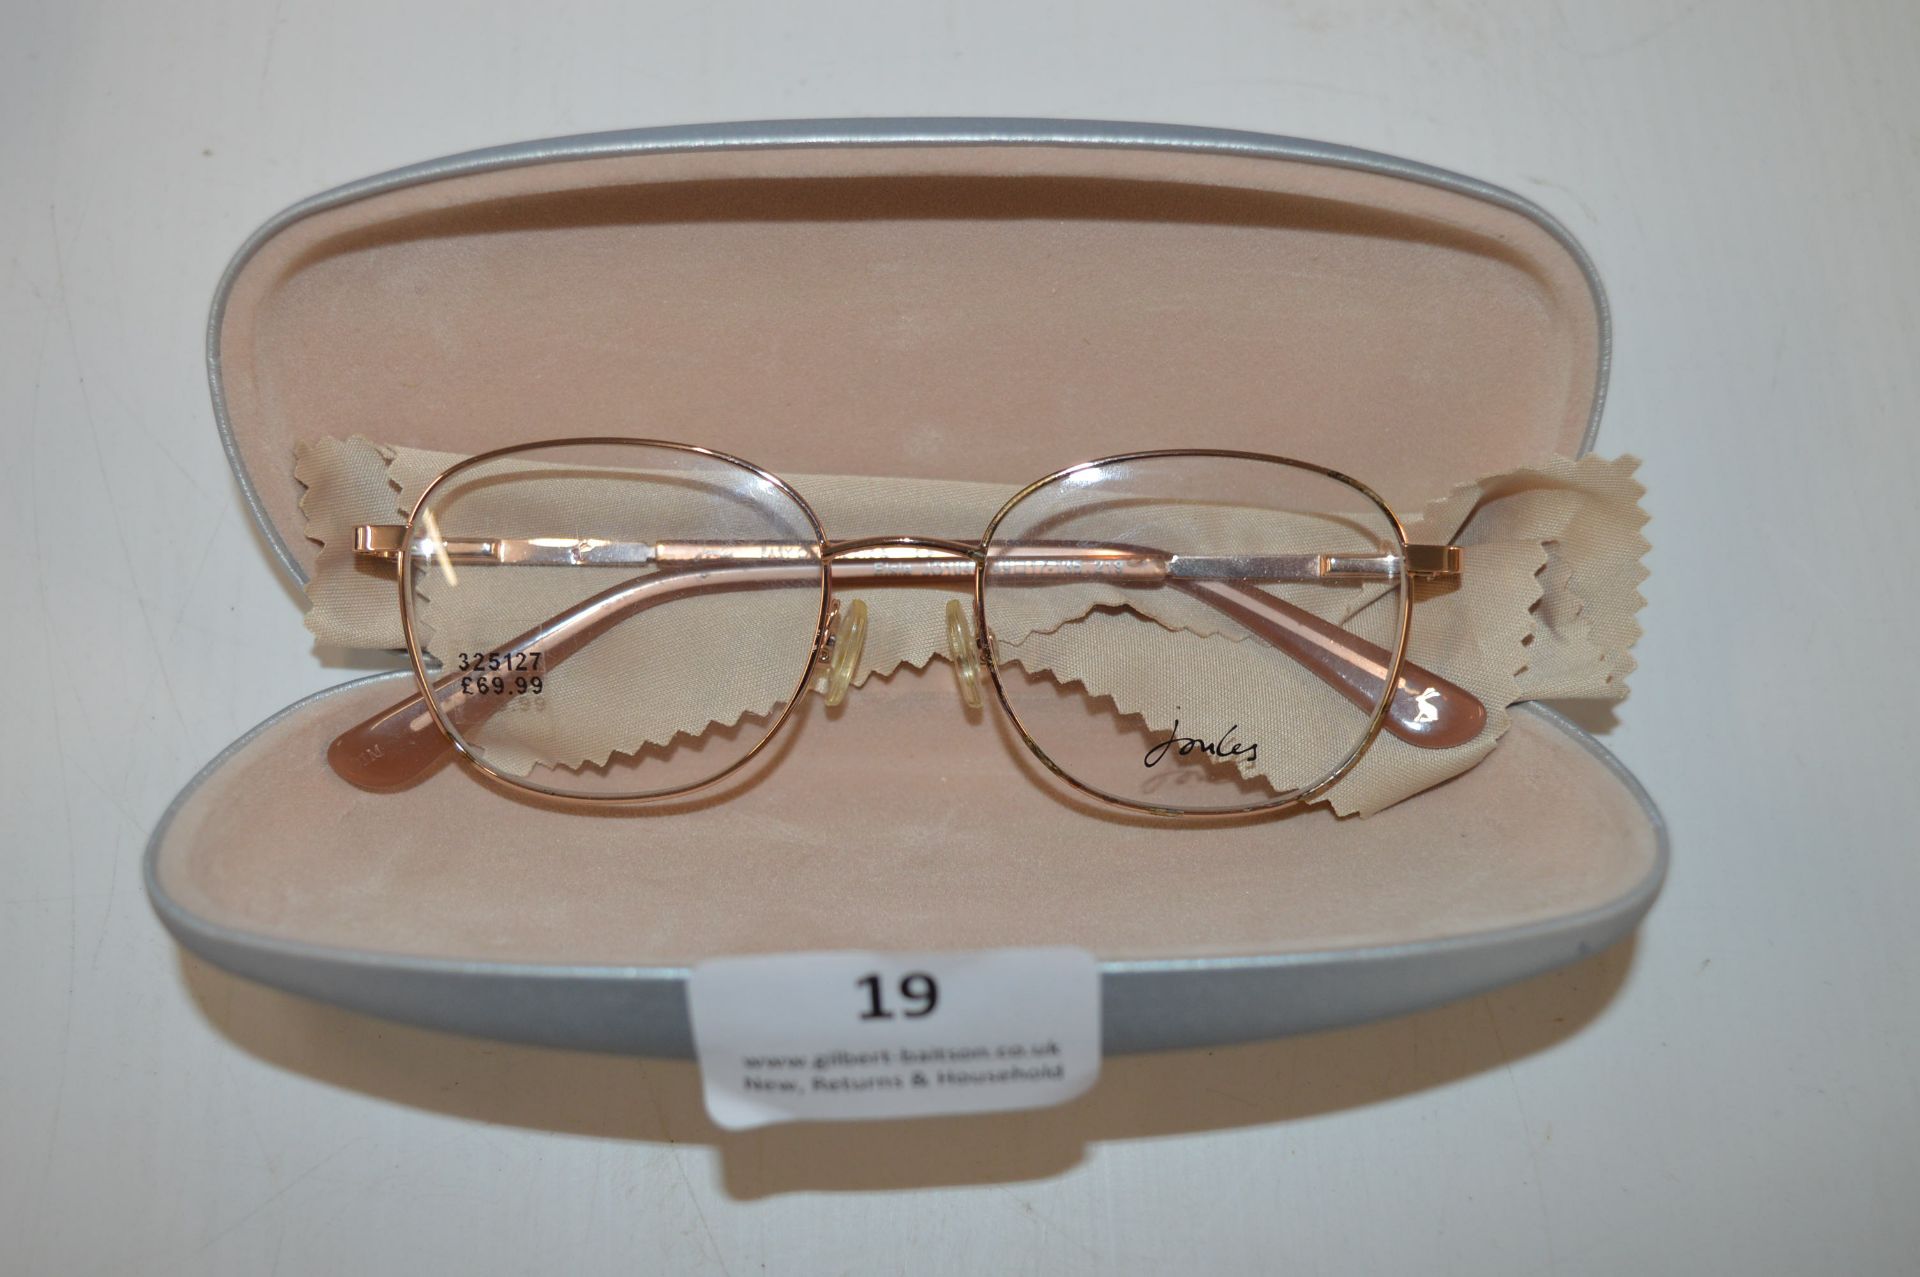 *Joules Ladies Spectacle Frames